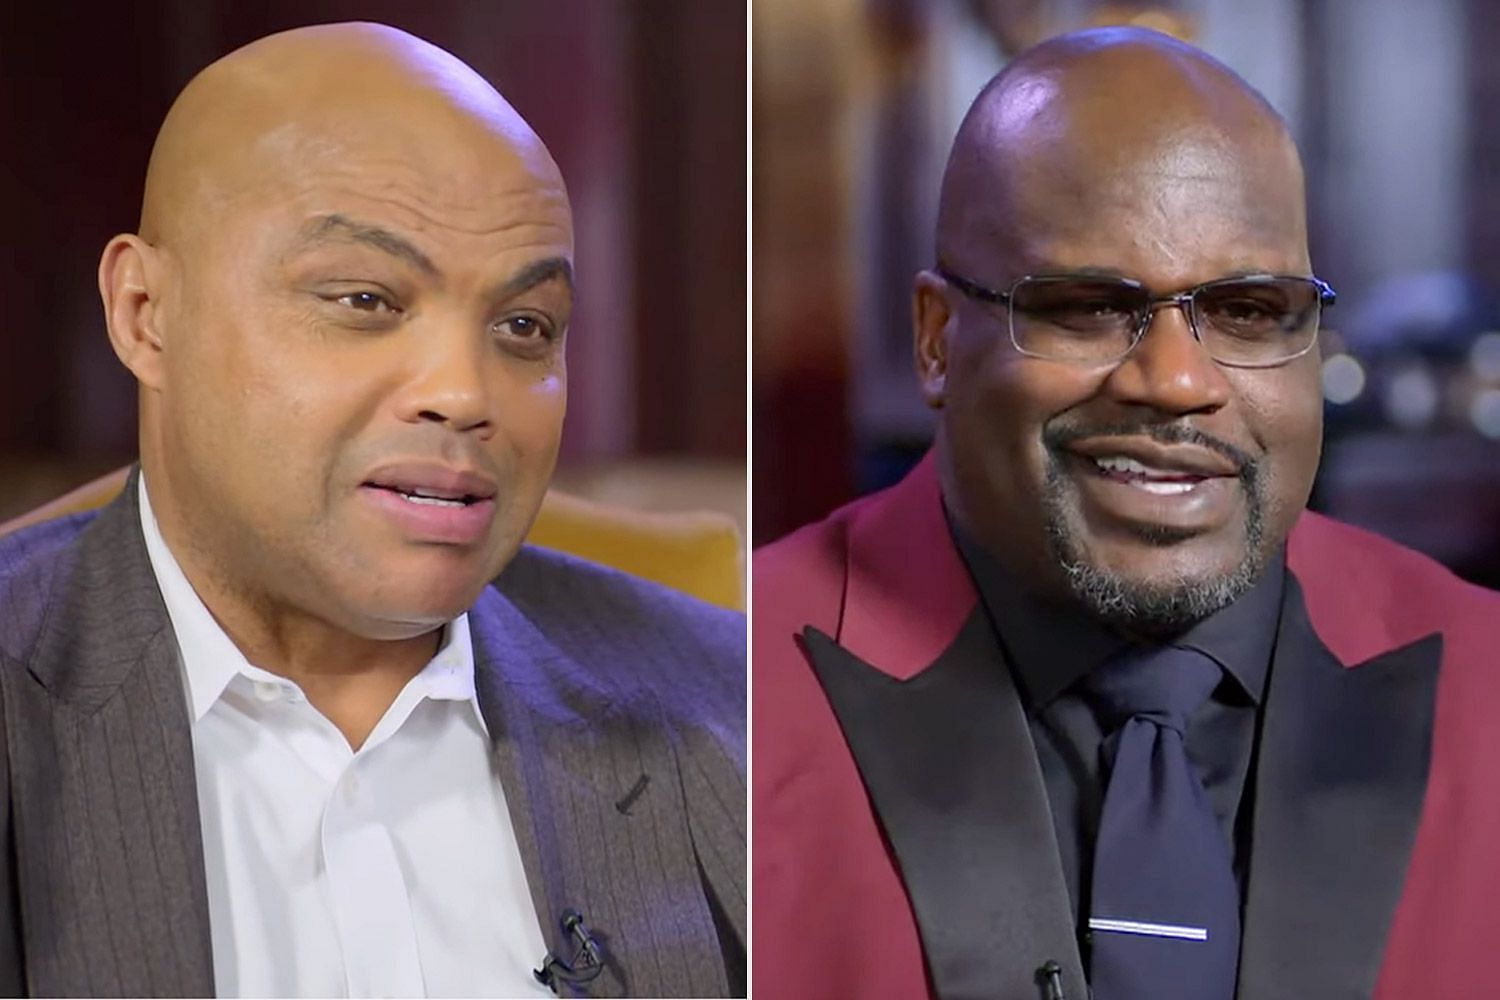 Shaquille O'Neal and Charles Barkley are the lifeblood of the Inside the NBA team. [photo: People]